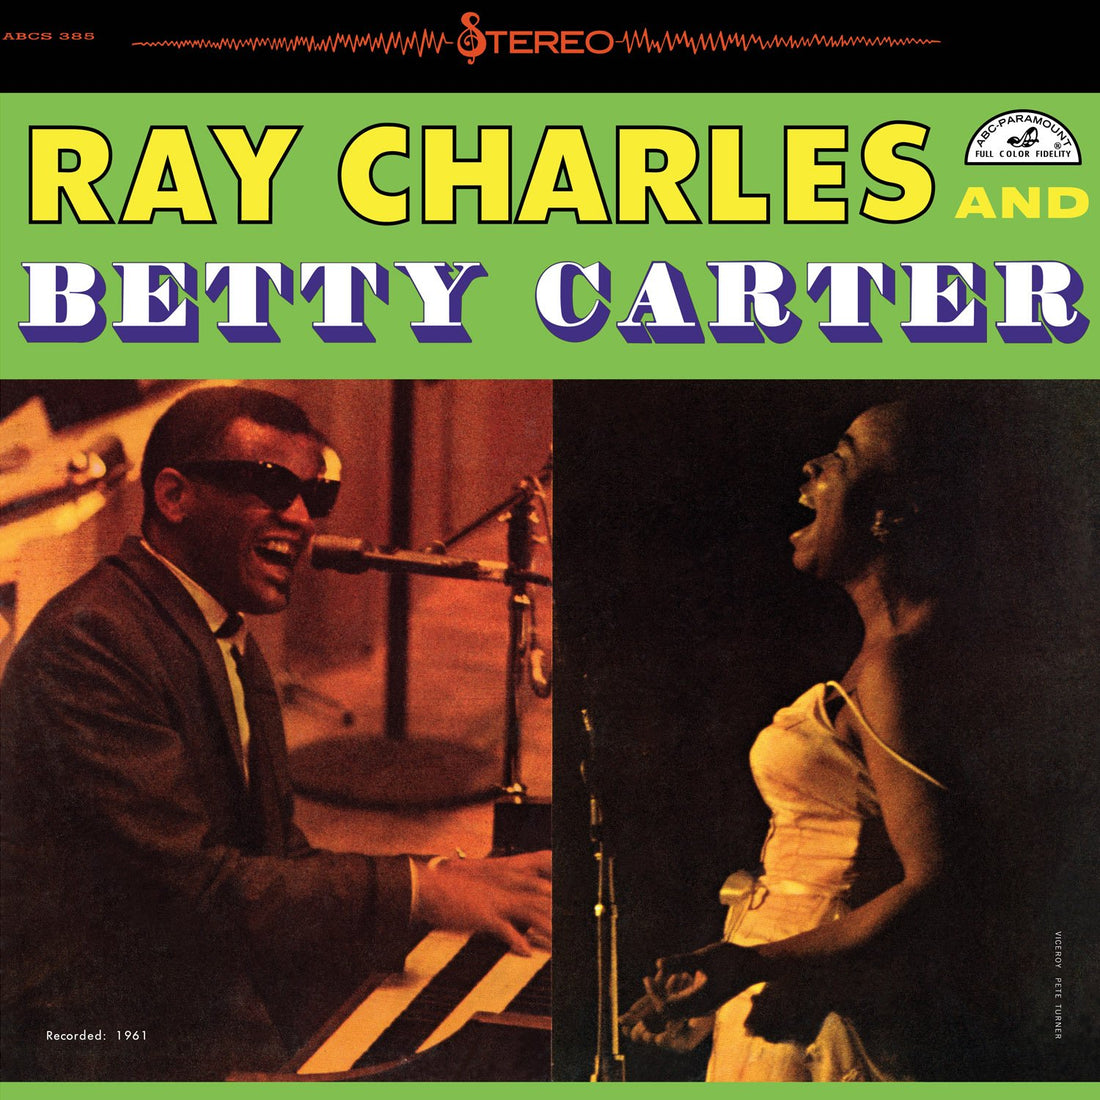 Ray Charles & Betty Carter- ST